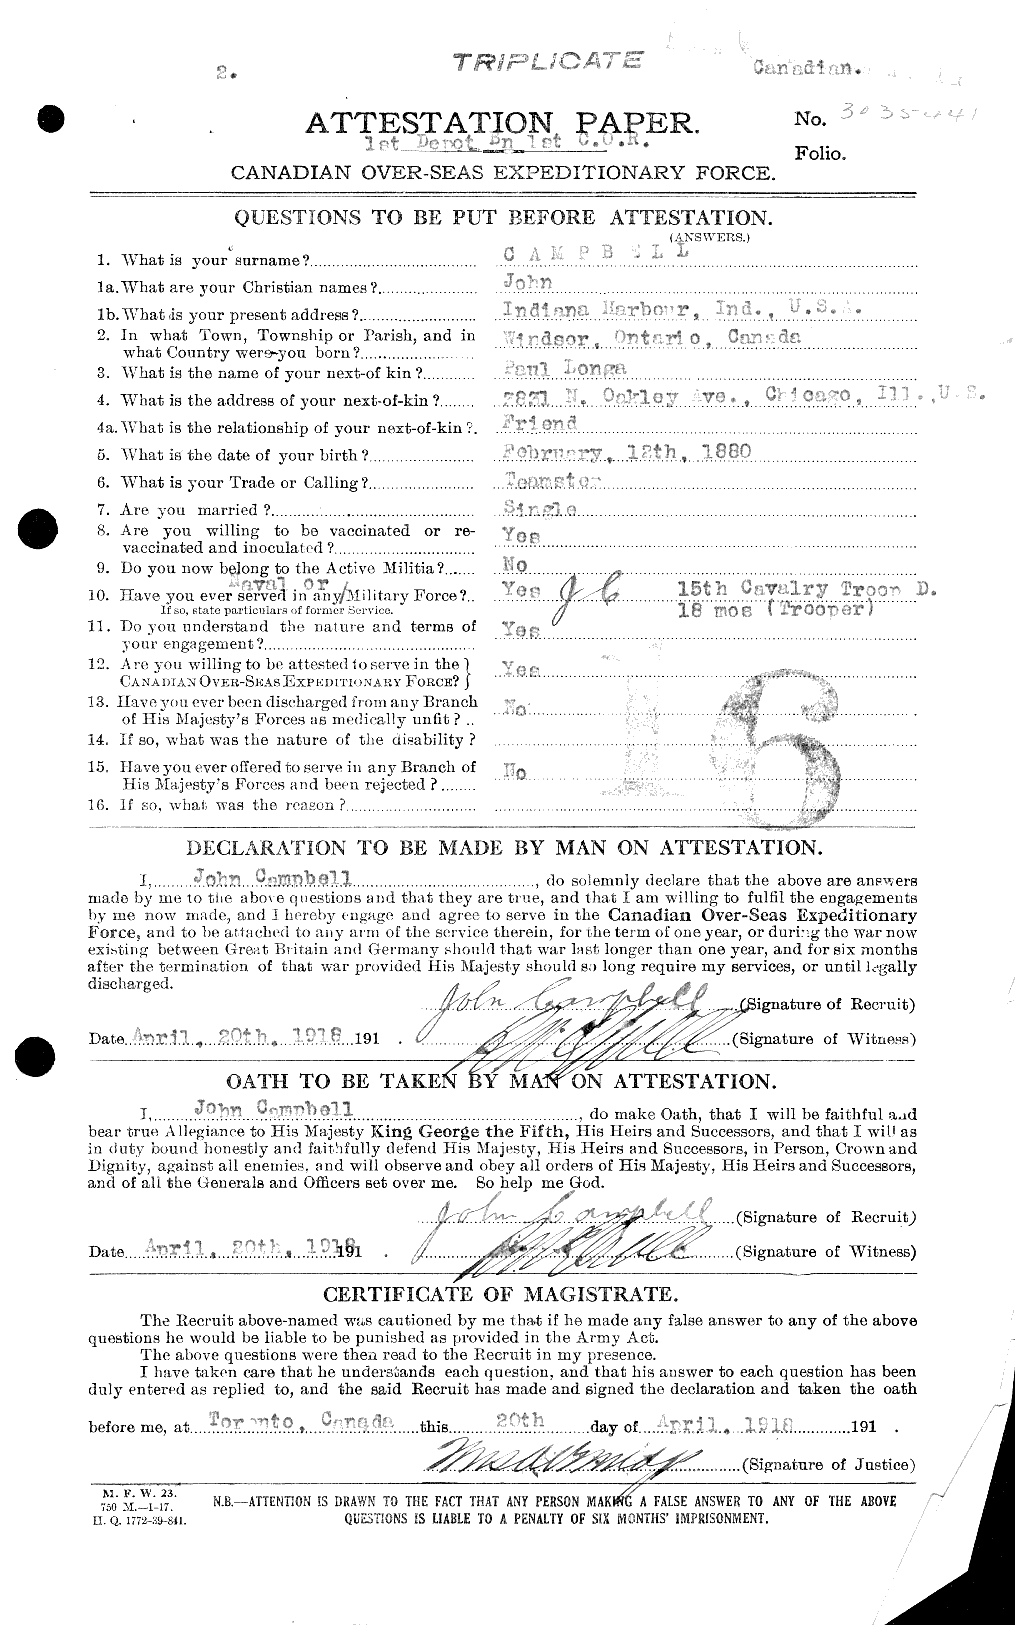 Personnel Records of the First World War - CEF 008490a